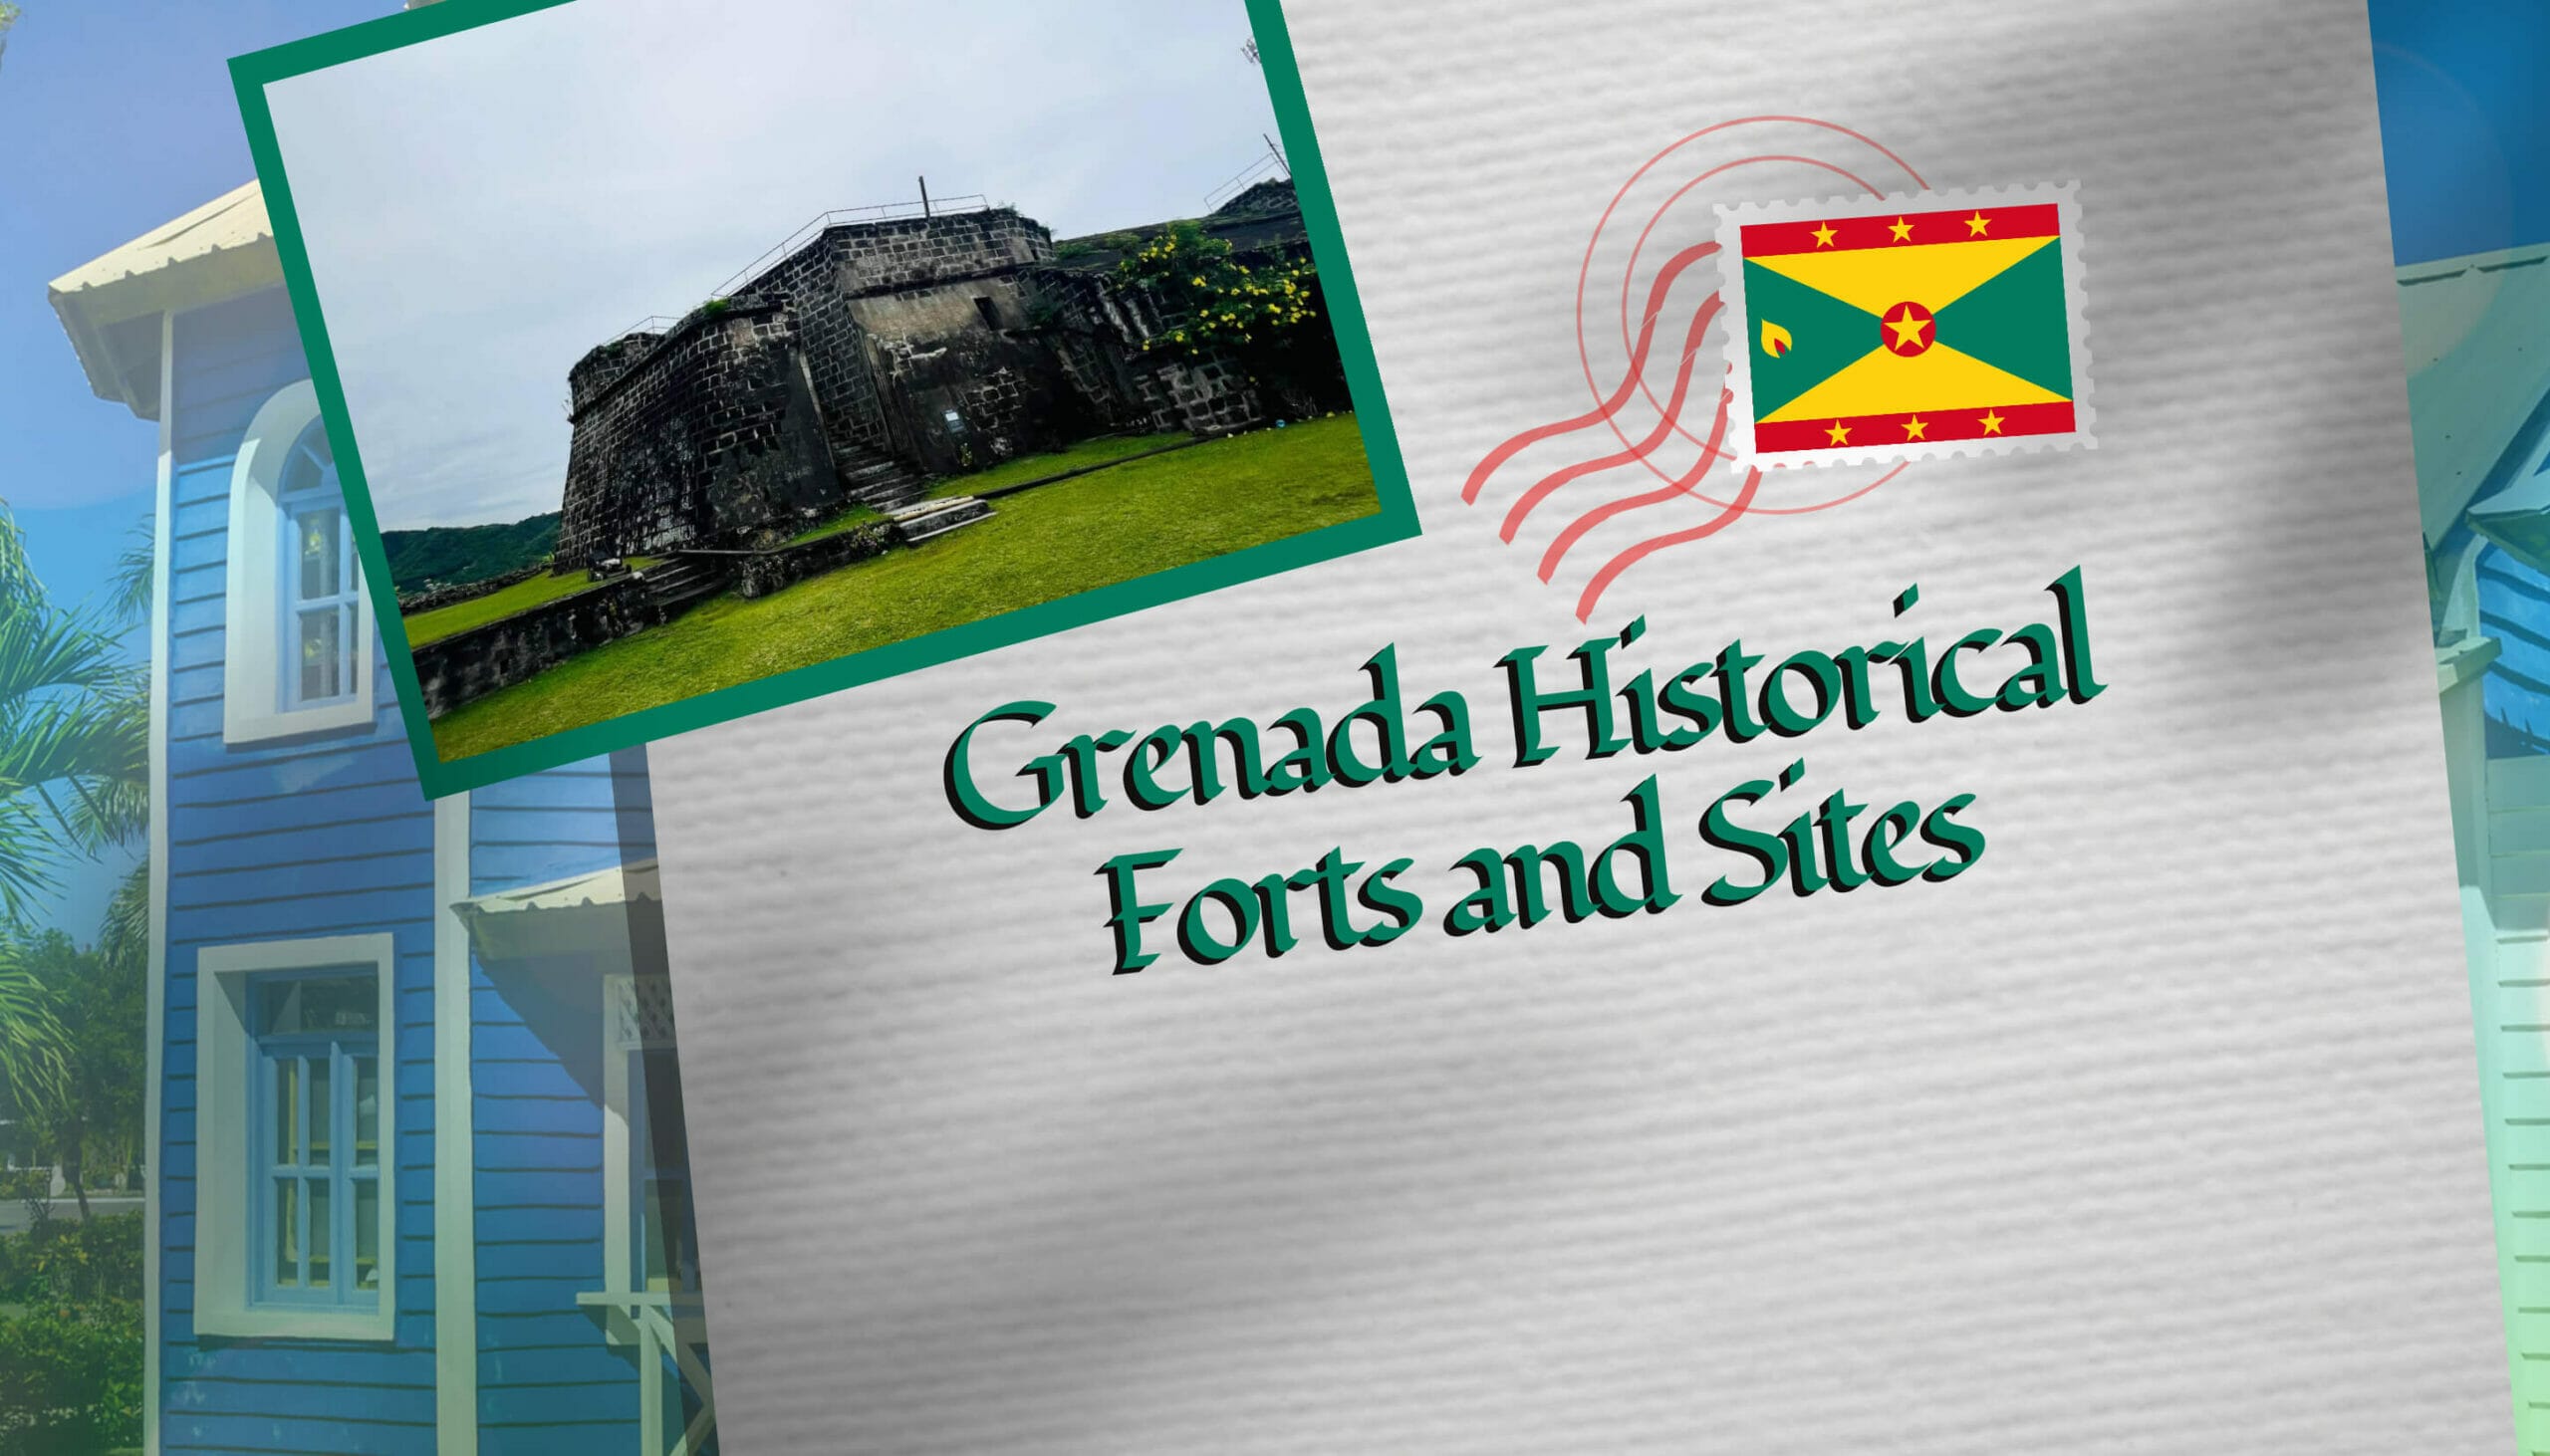 Grenada Historical Forts and Sites